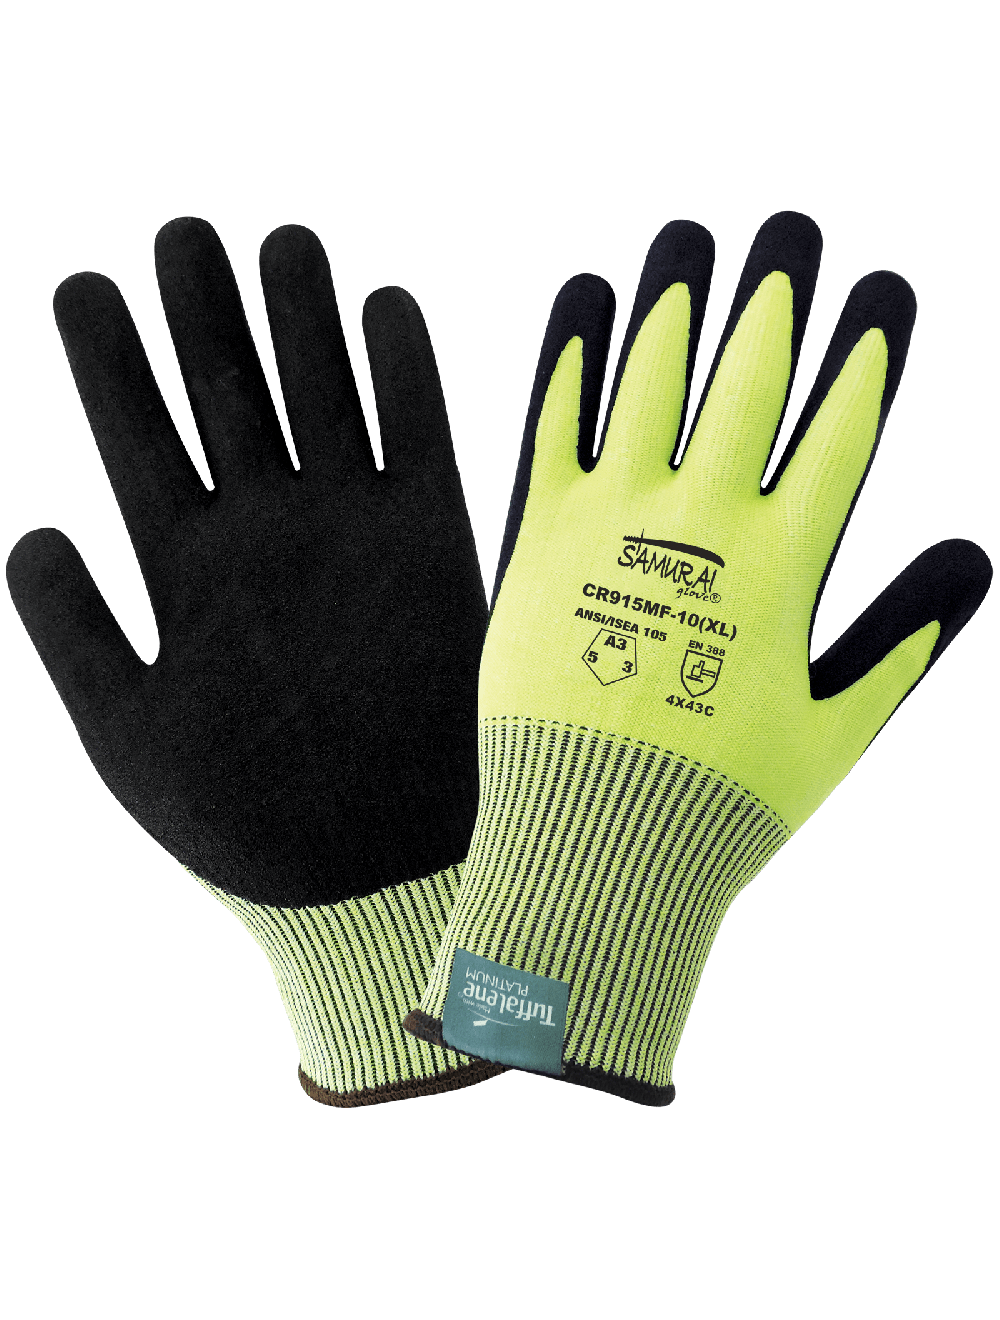 Samurai Glove® High-Visibility Cut, Abrasion, and Puncture Resistant Gloves Made with Tuffalene® Platinum - CR915MF